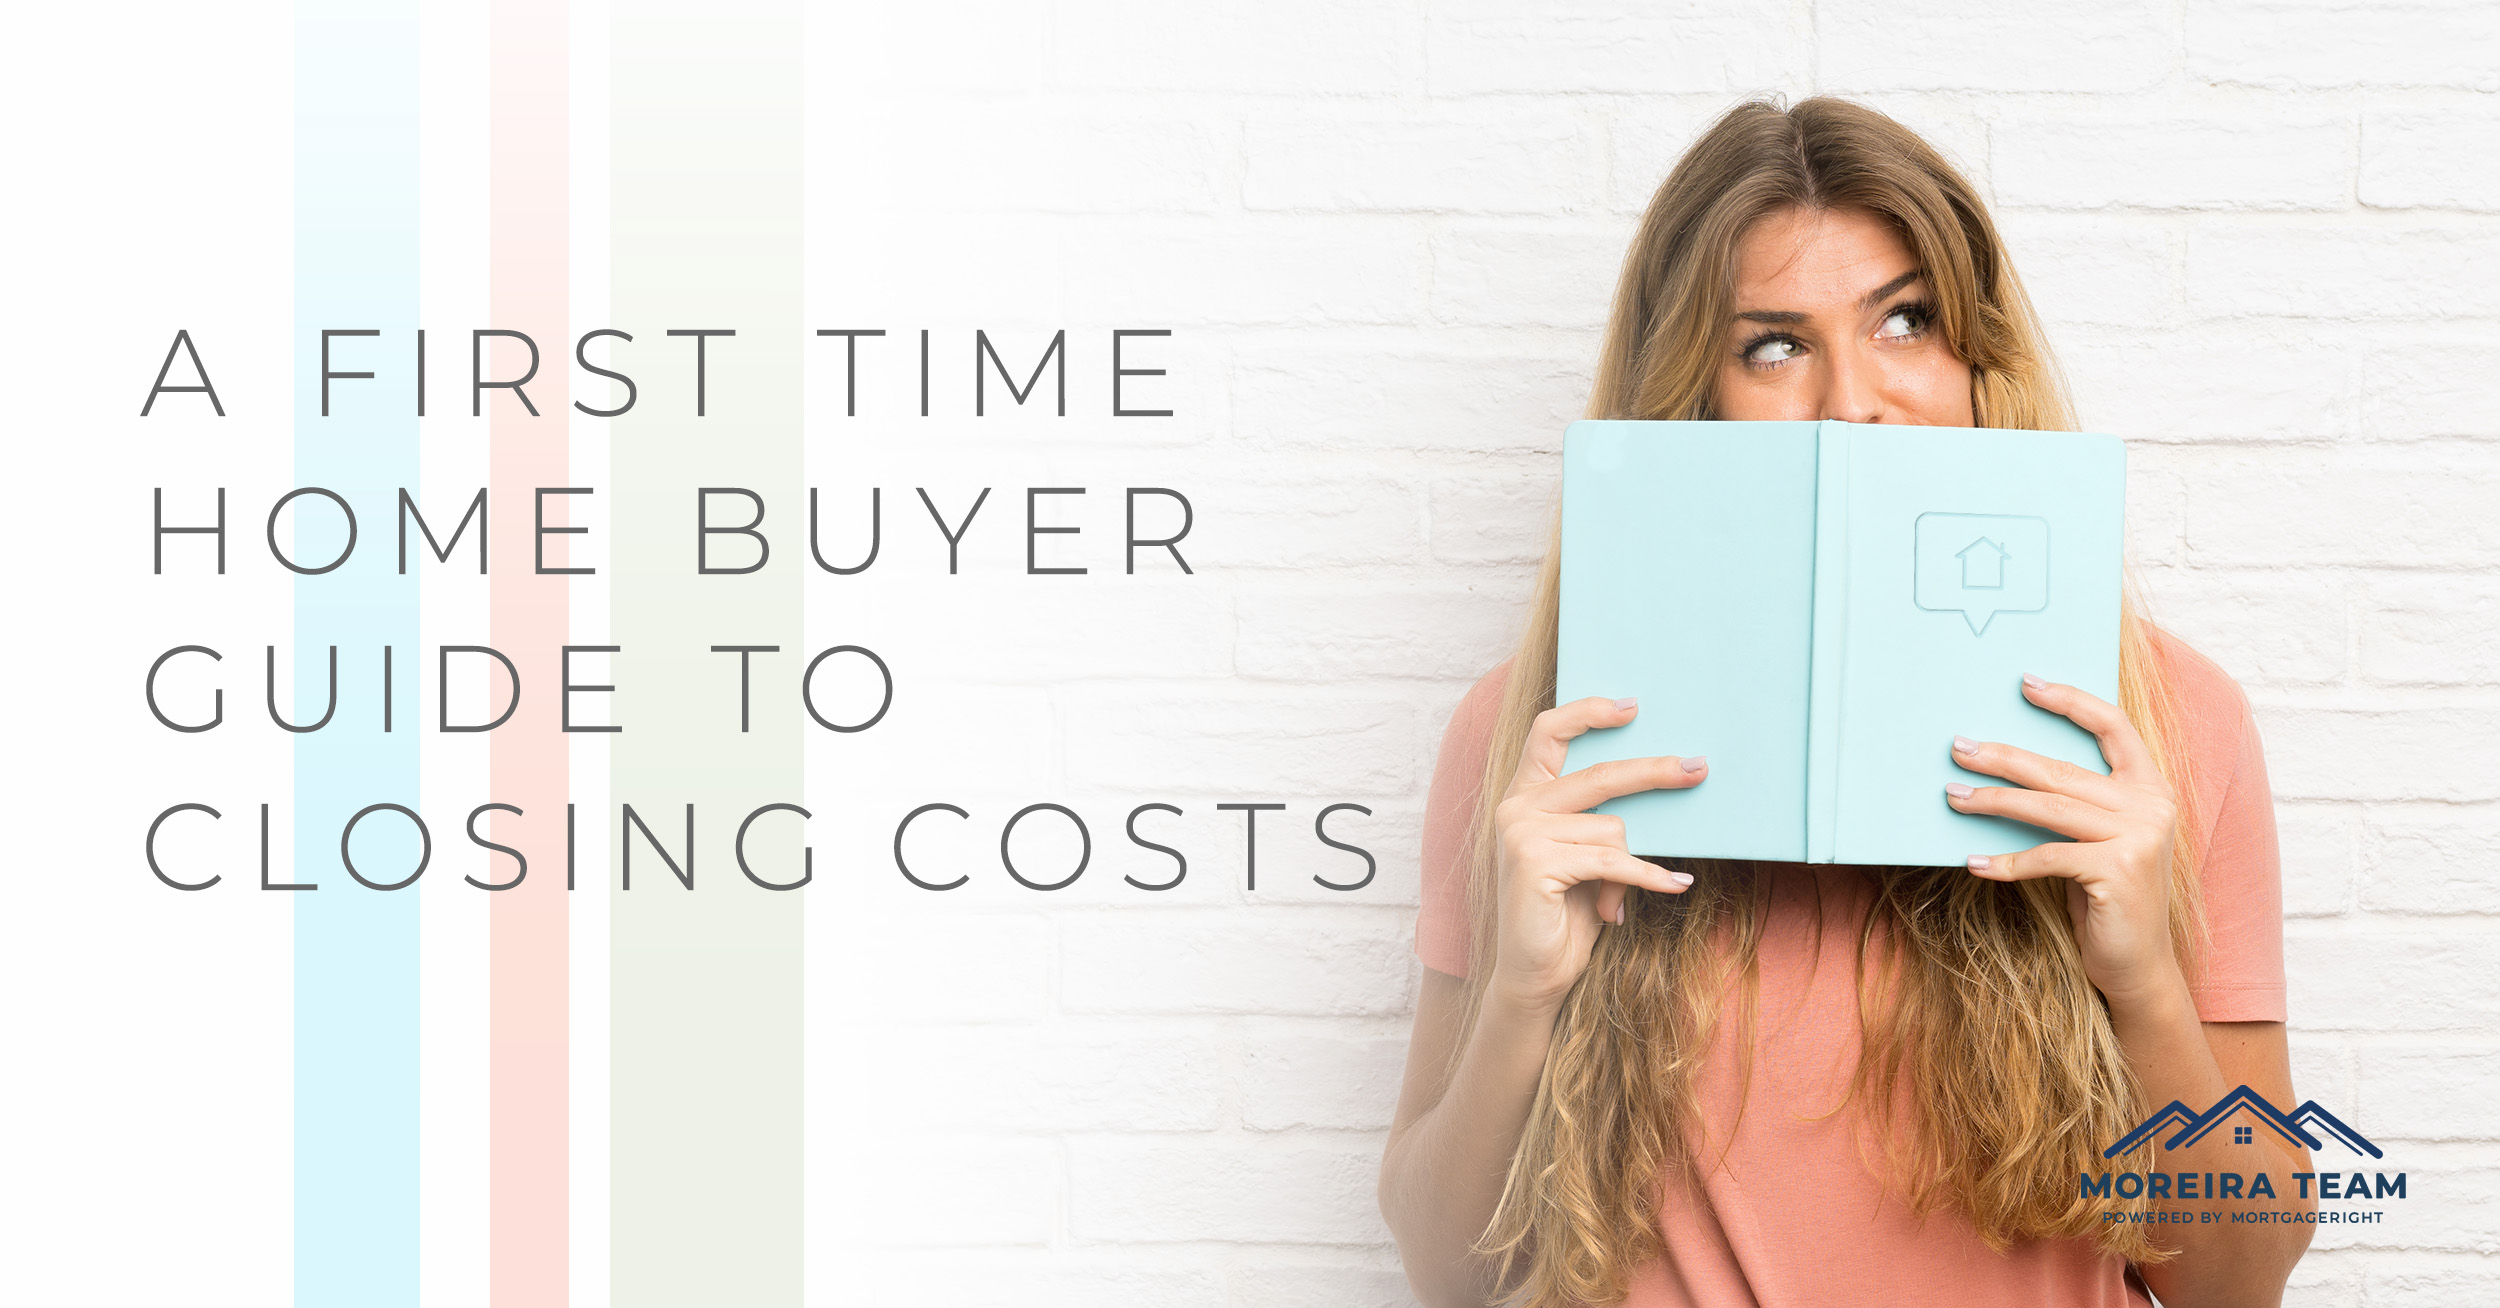 A First Time Home Buyer Guide to Closing Costs